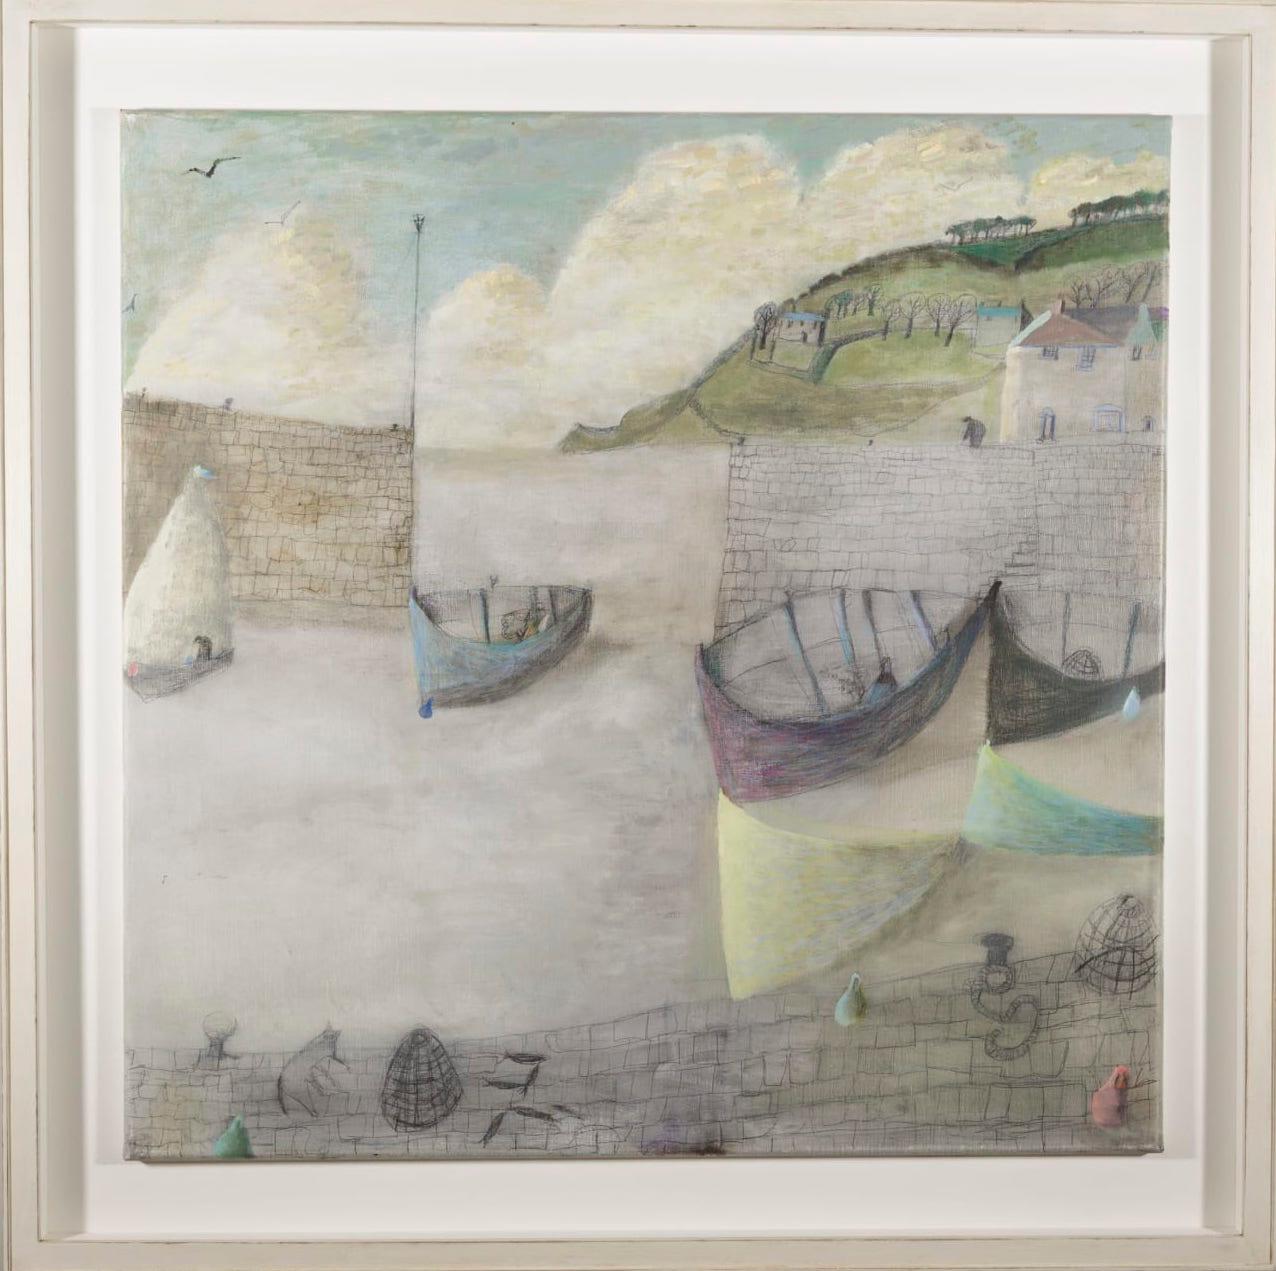 Creel and Cat, Quayside - coastal painting with boats, beach, grey and green  - Painting by Nicholas Turner